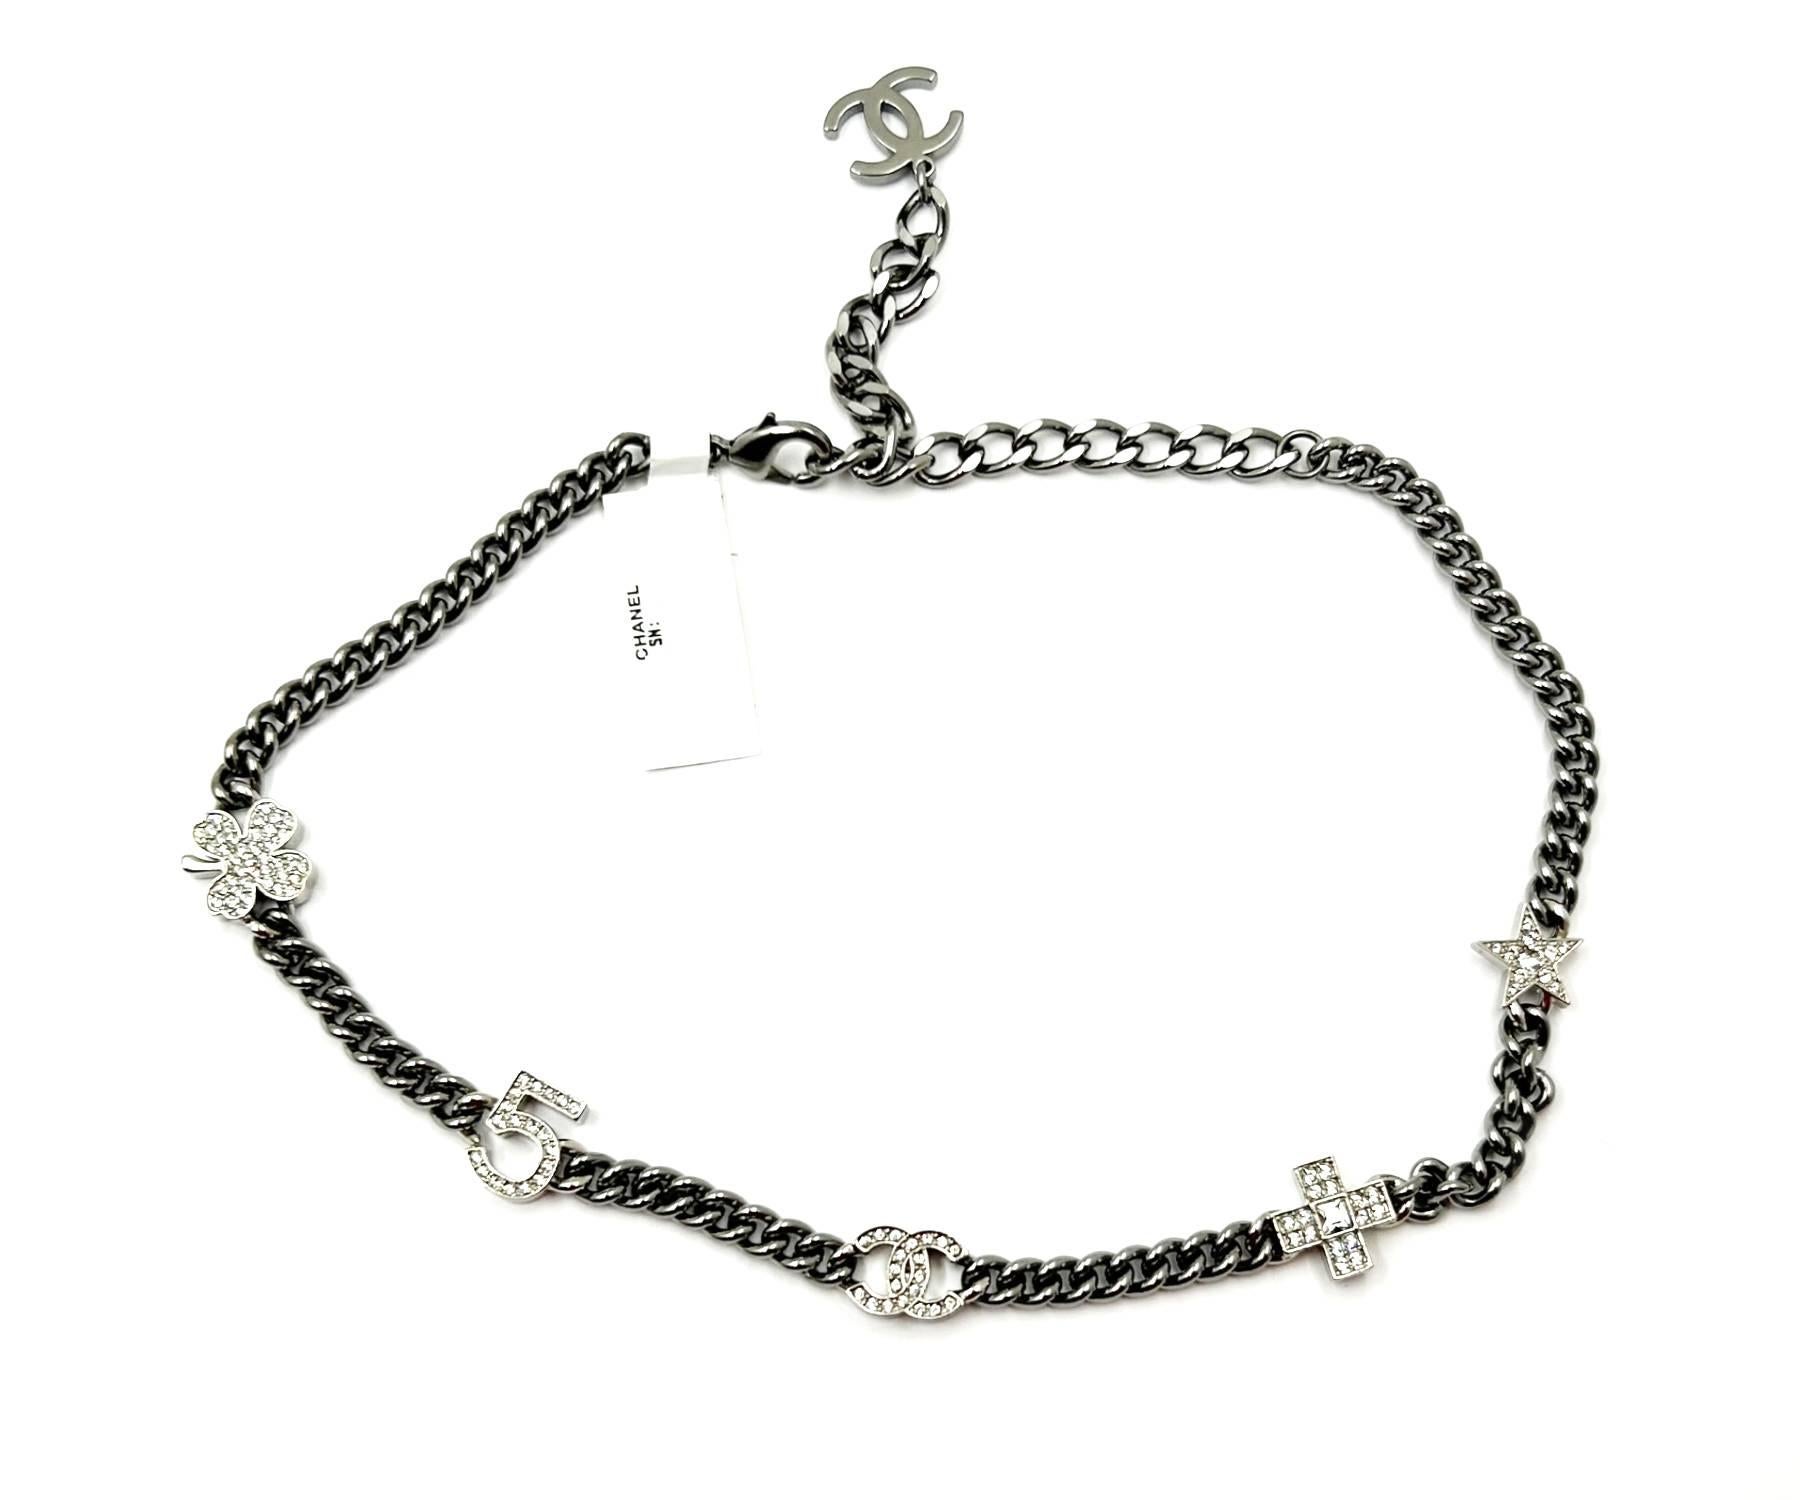 Chanel Brand New Silver 5 Crystal Charms Gunmetal Chain Choker Necklace

* Marked 23
* Made in France
* Comes with the original box, pouch, tag, booklet, ribbon and camellia
* Brand New

-It is approximately 13